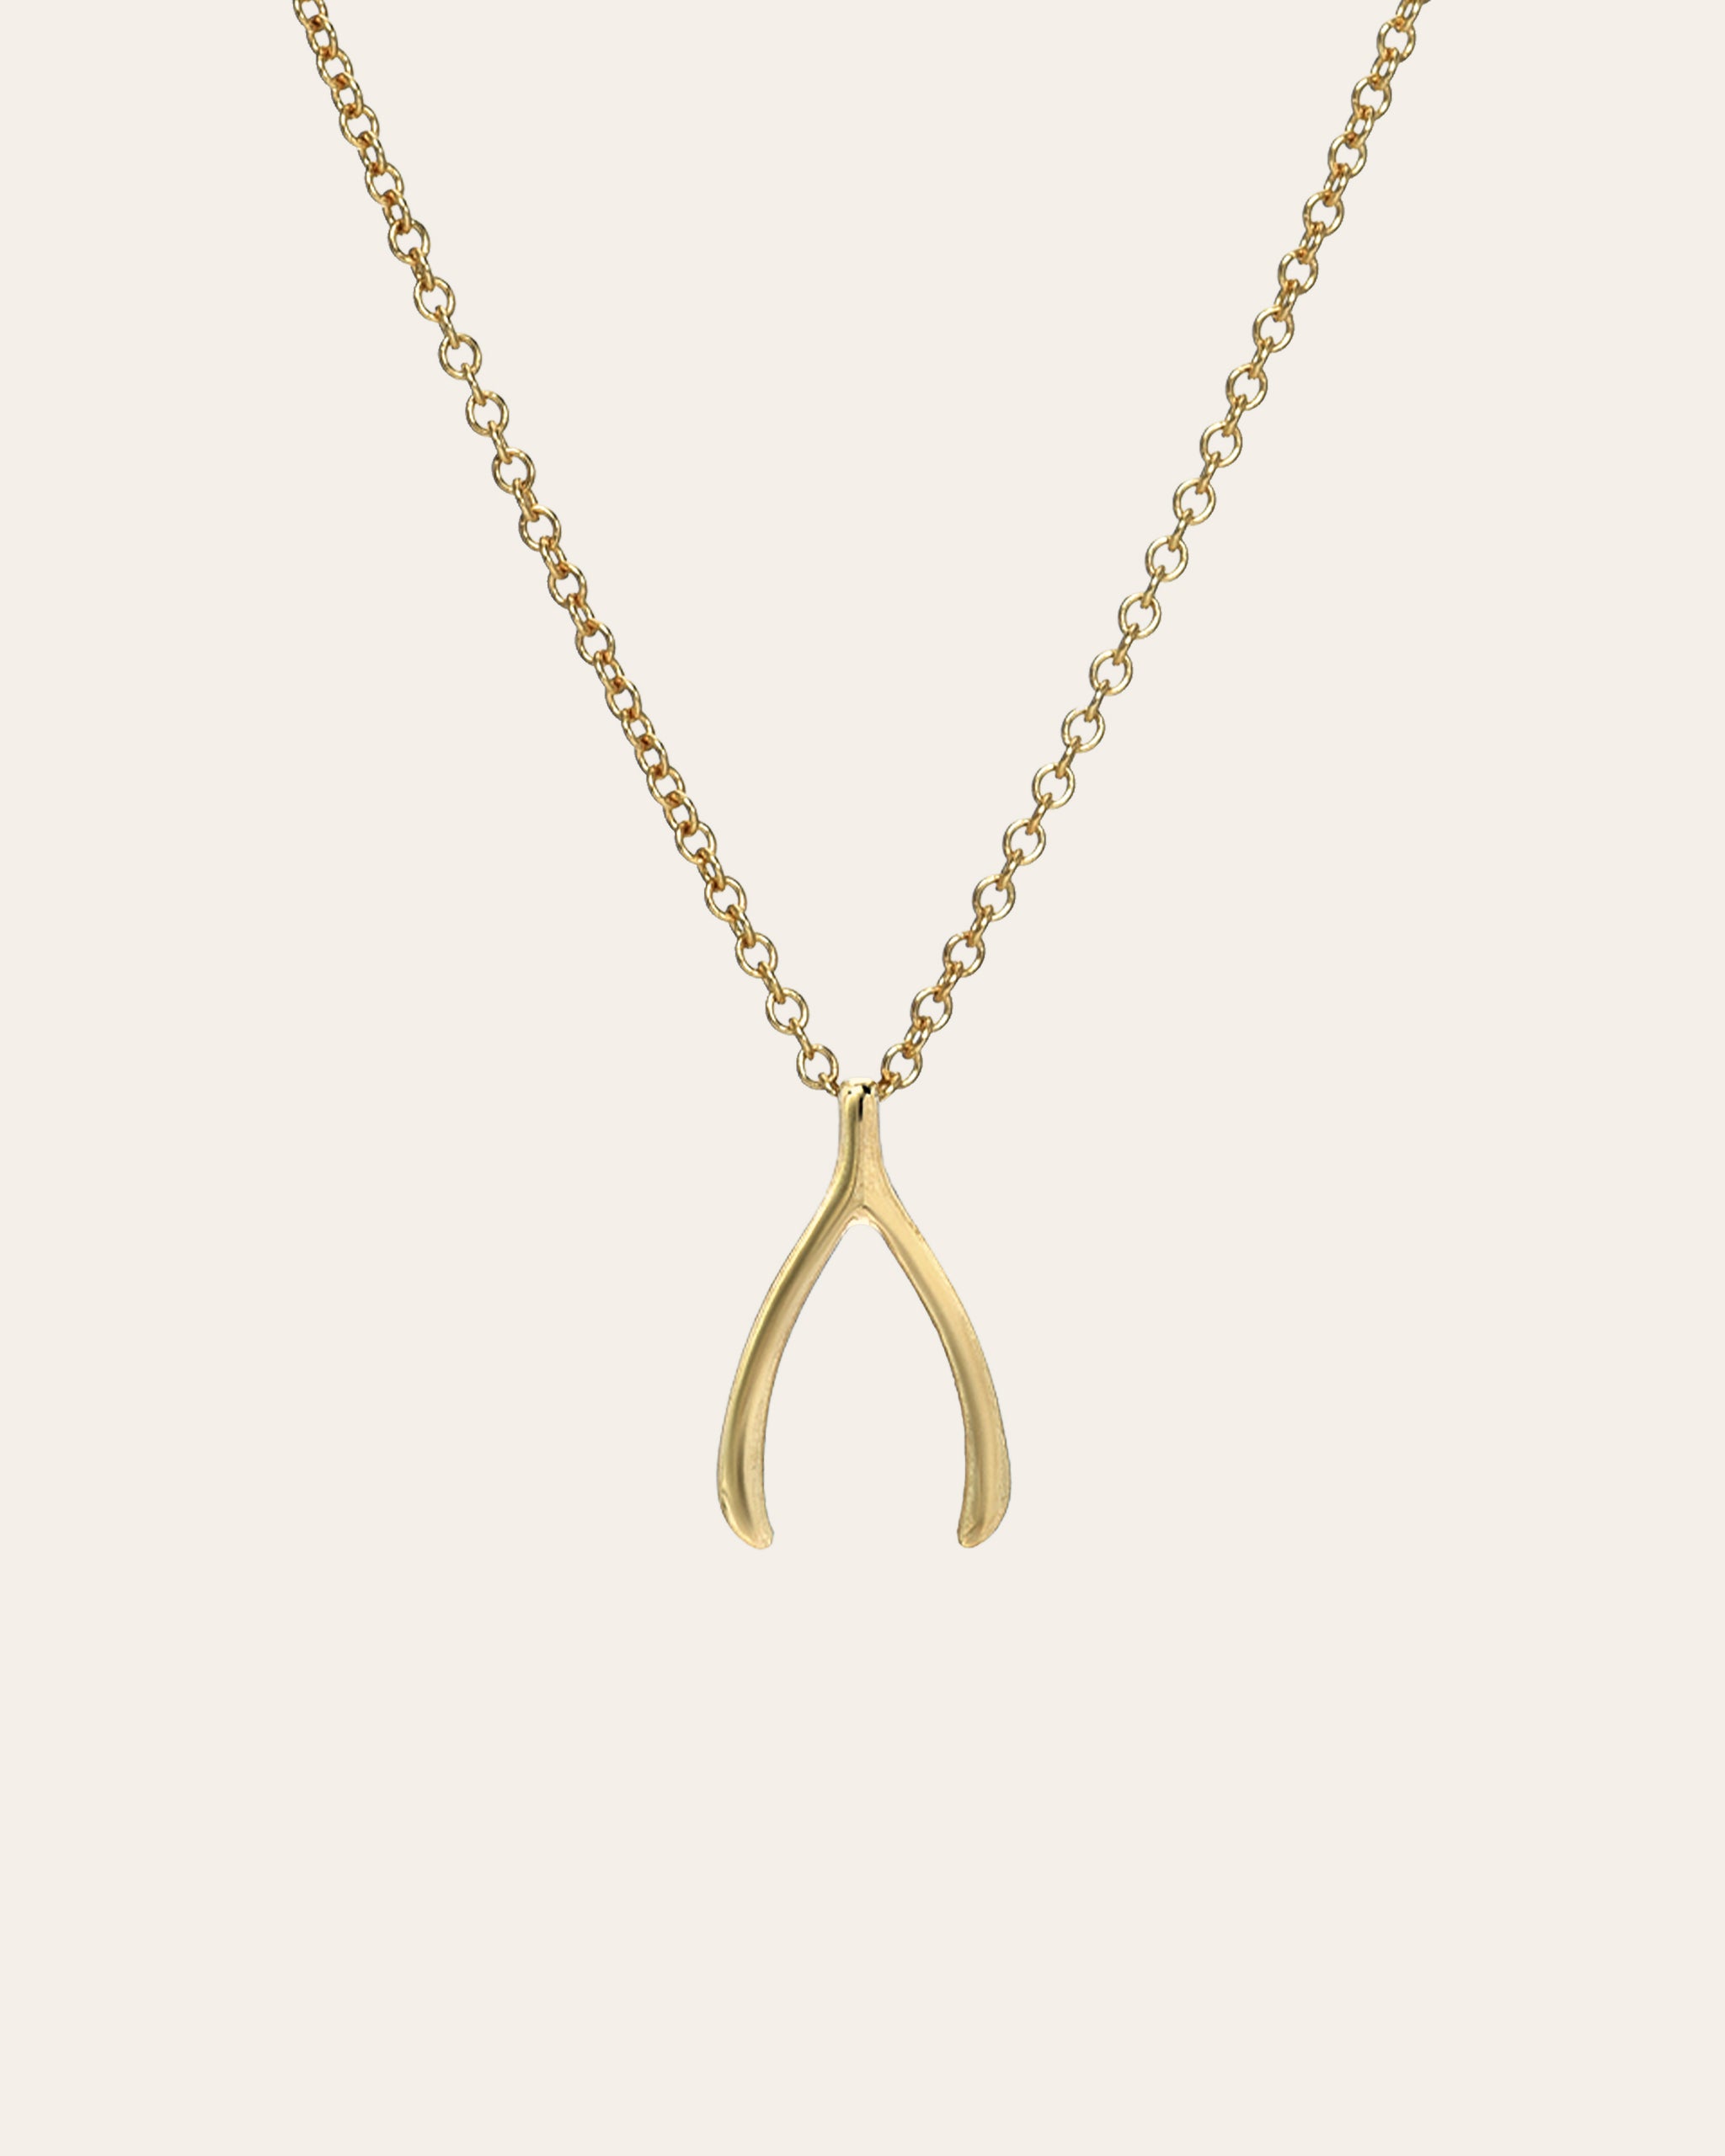 Gold Plated Sterling Silver Wishbone Pendant Necklace - Lovisa